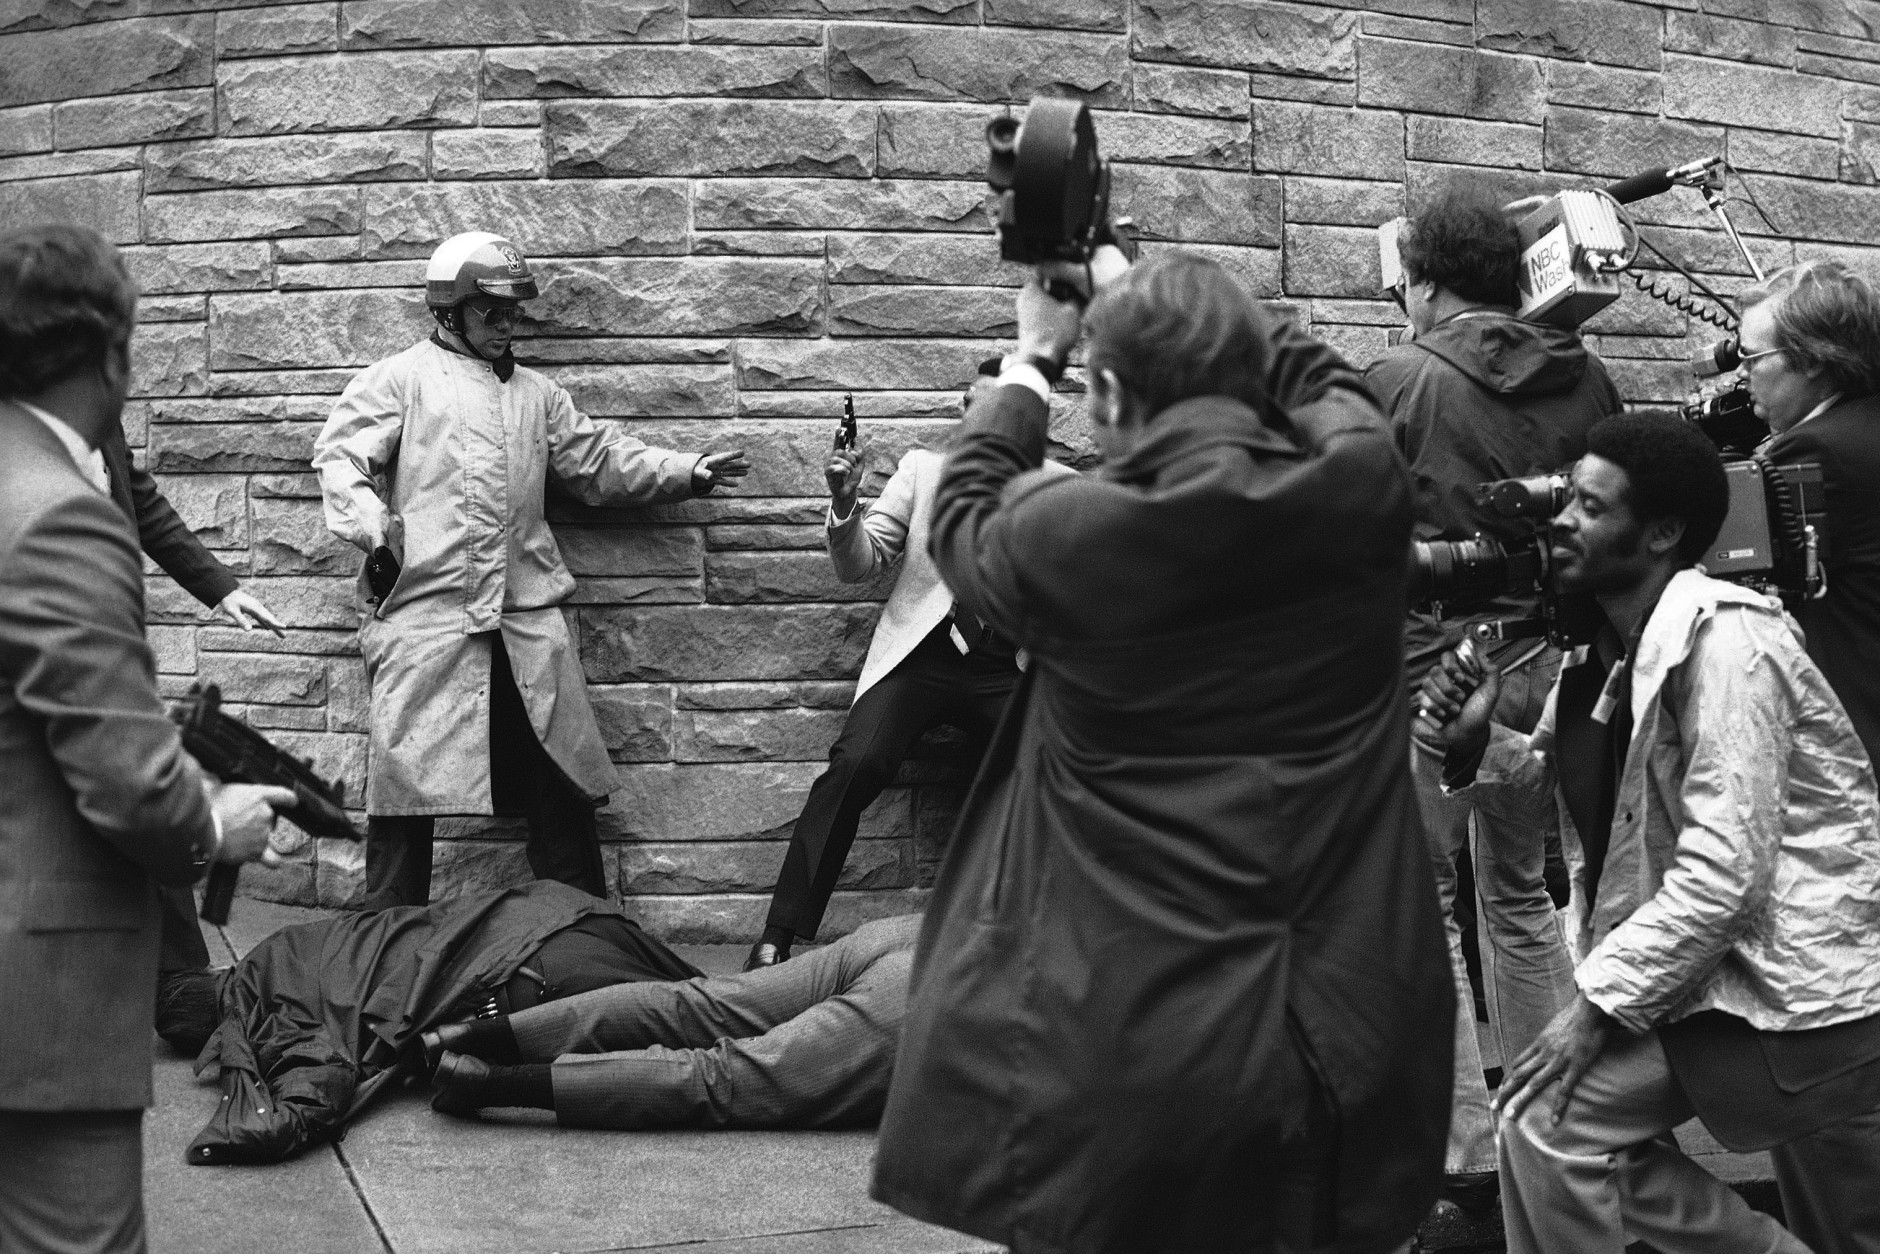 White House press secretary James Brady lies wounded on the sidewalk outside a Washington hotel after being shot during an assassination attempt on U.S. President Ronald Reagan on Monday, March 30, 1981. In the background secret service agents and police wrestle the alleged assailant to the ground. (AP Photo/Ron Edmonds)